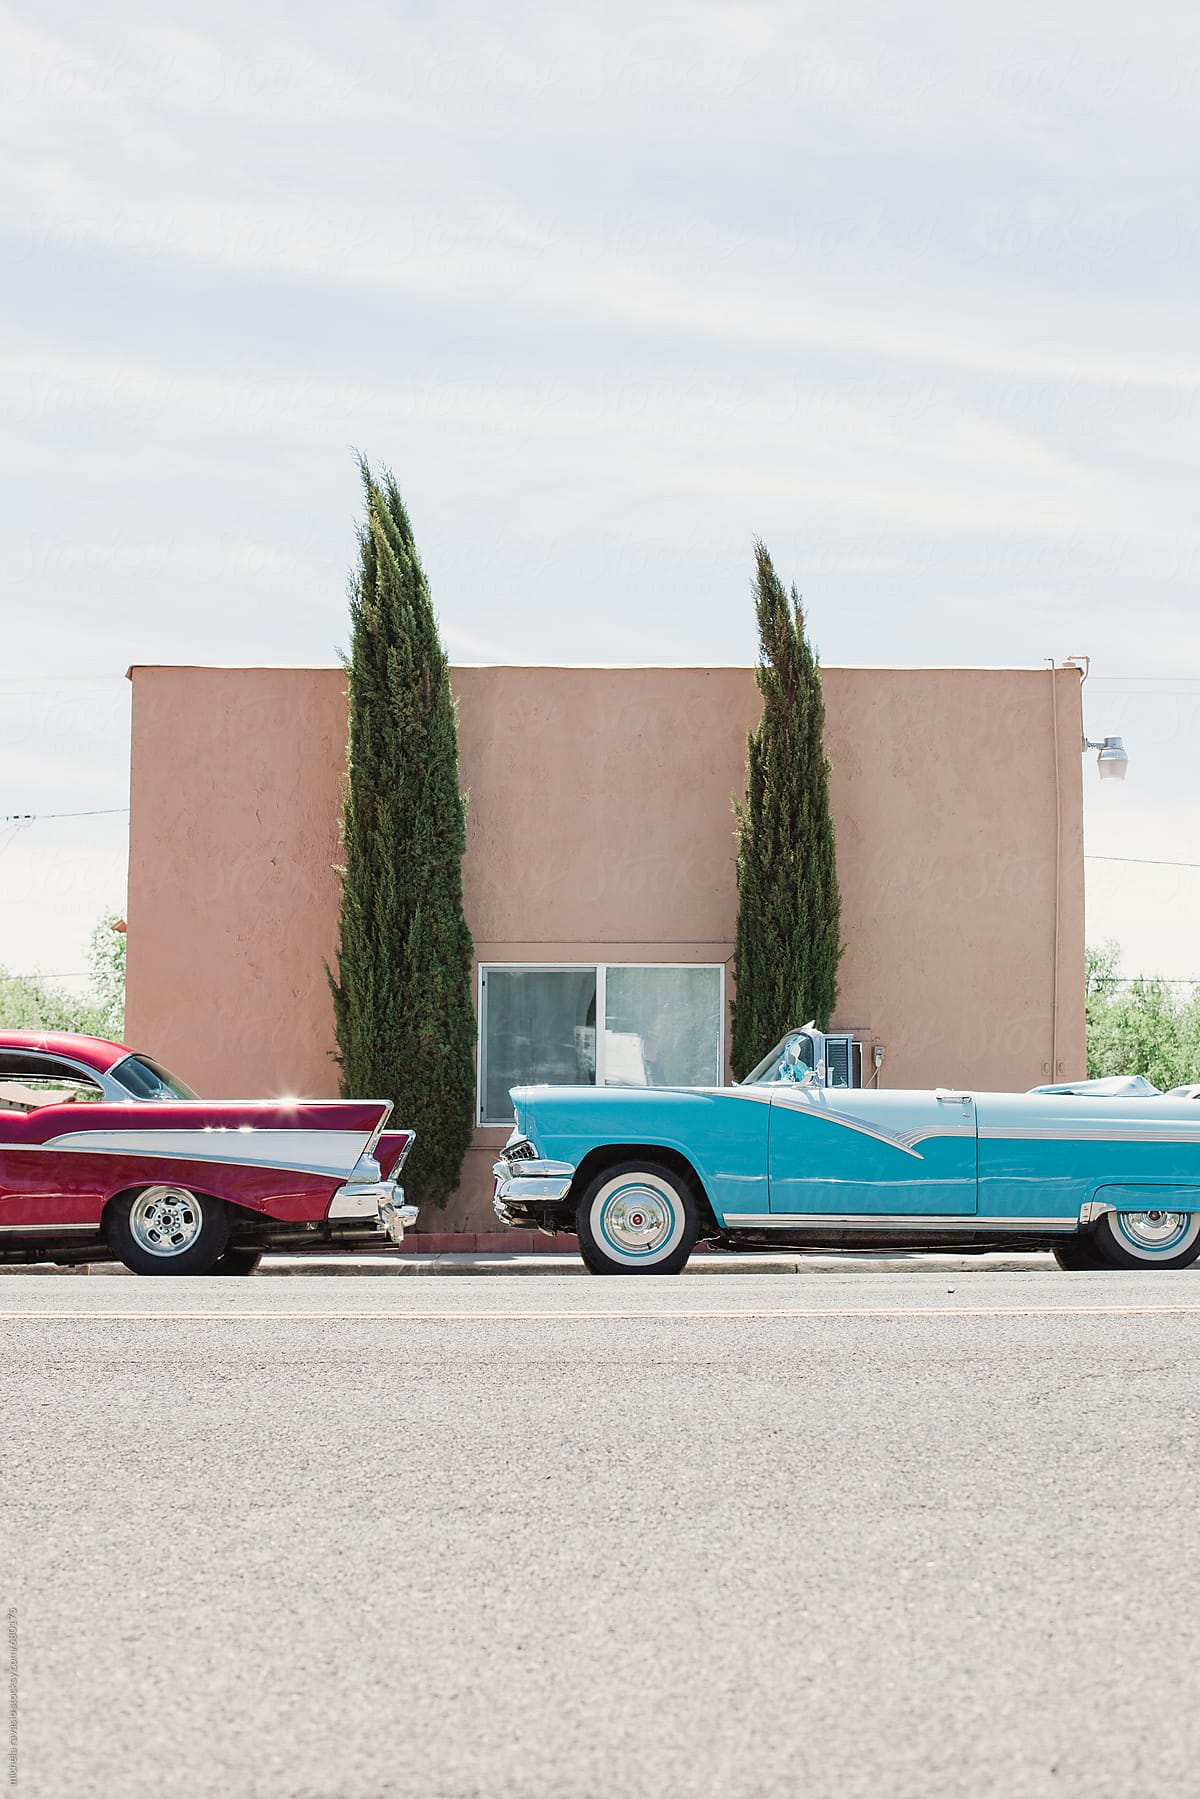 Two vintage cars parked outside a building on the route 66